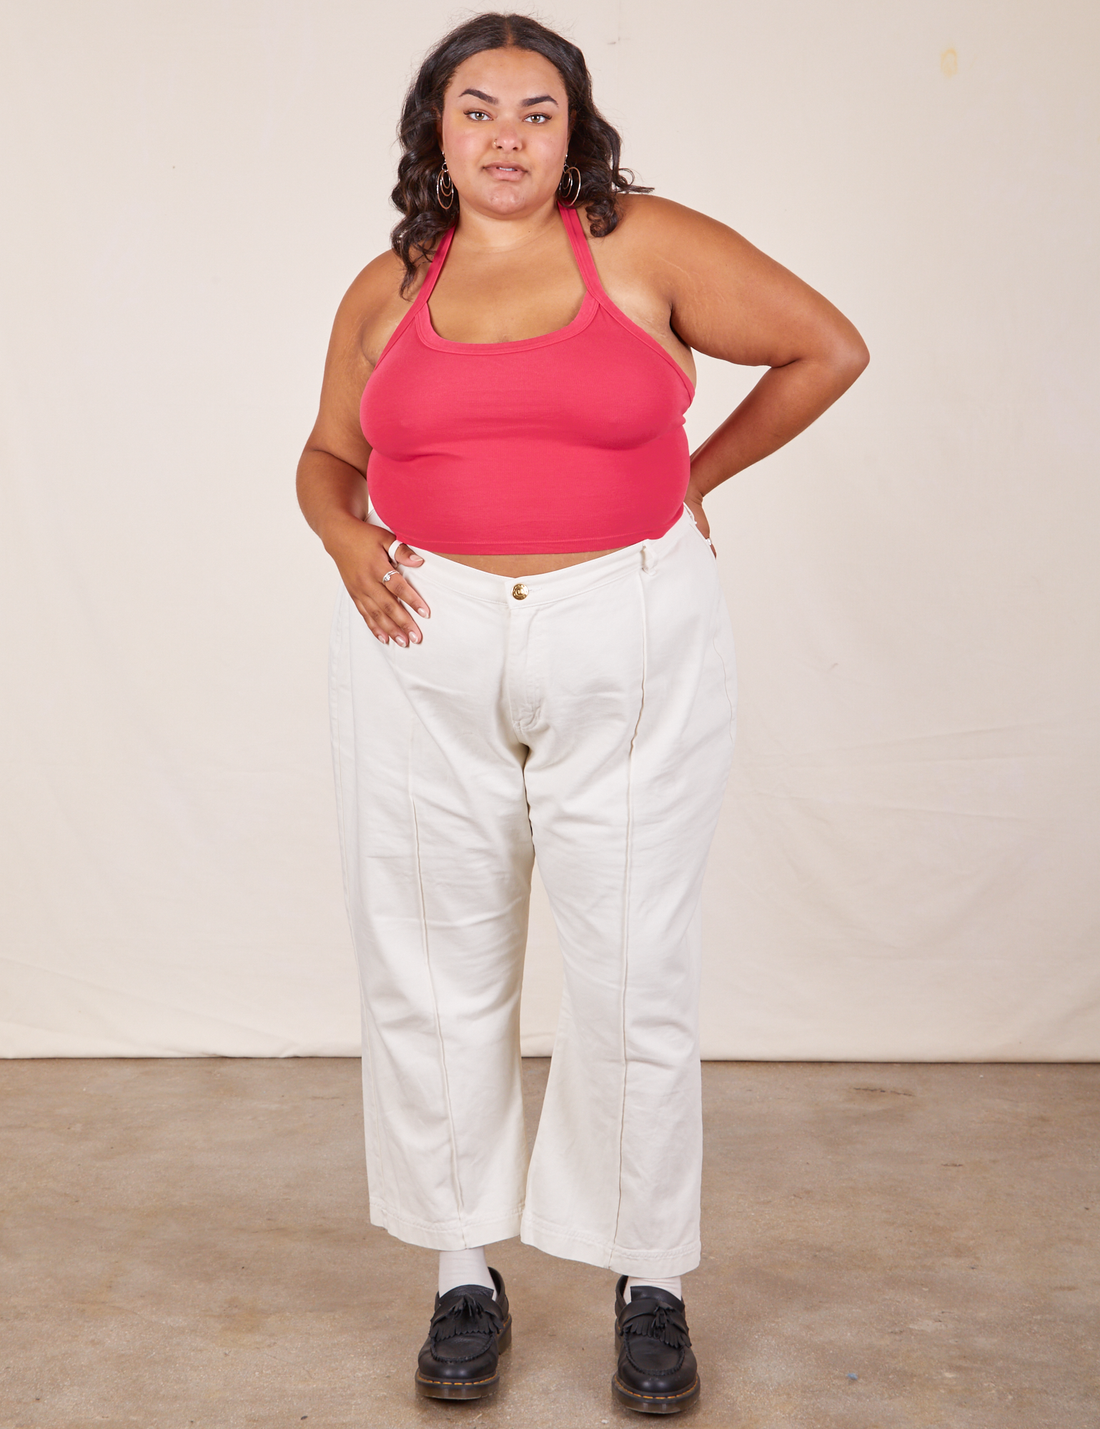 Alicia is wearing Halter Top in Hot Pink and vintage off-white Western Pants